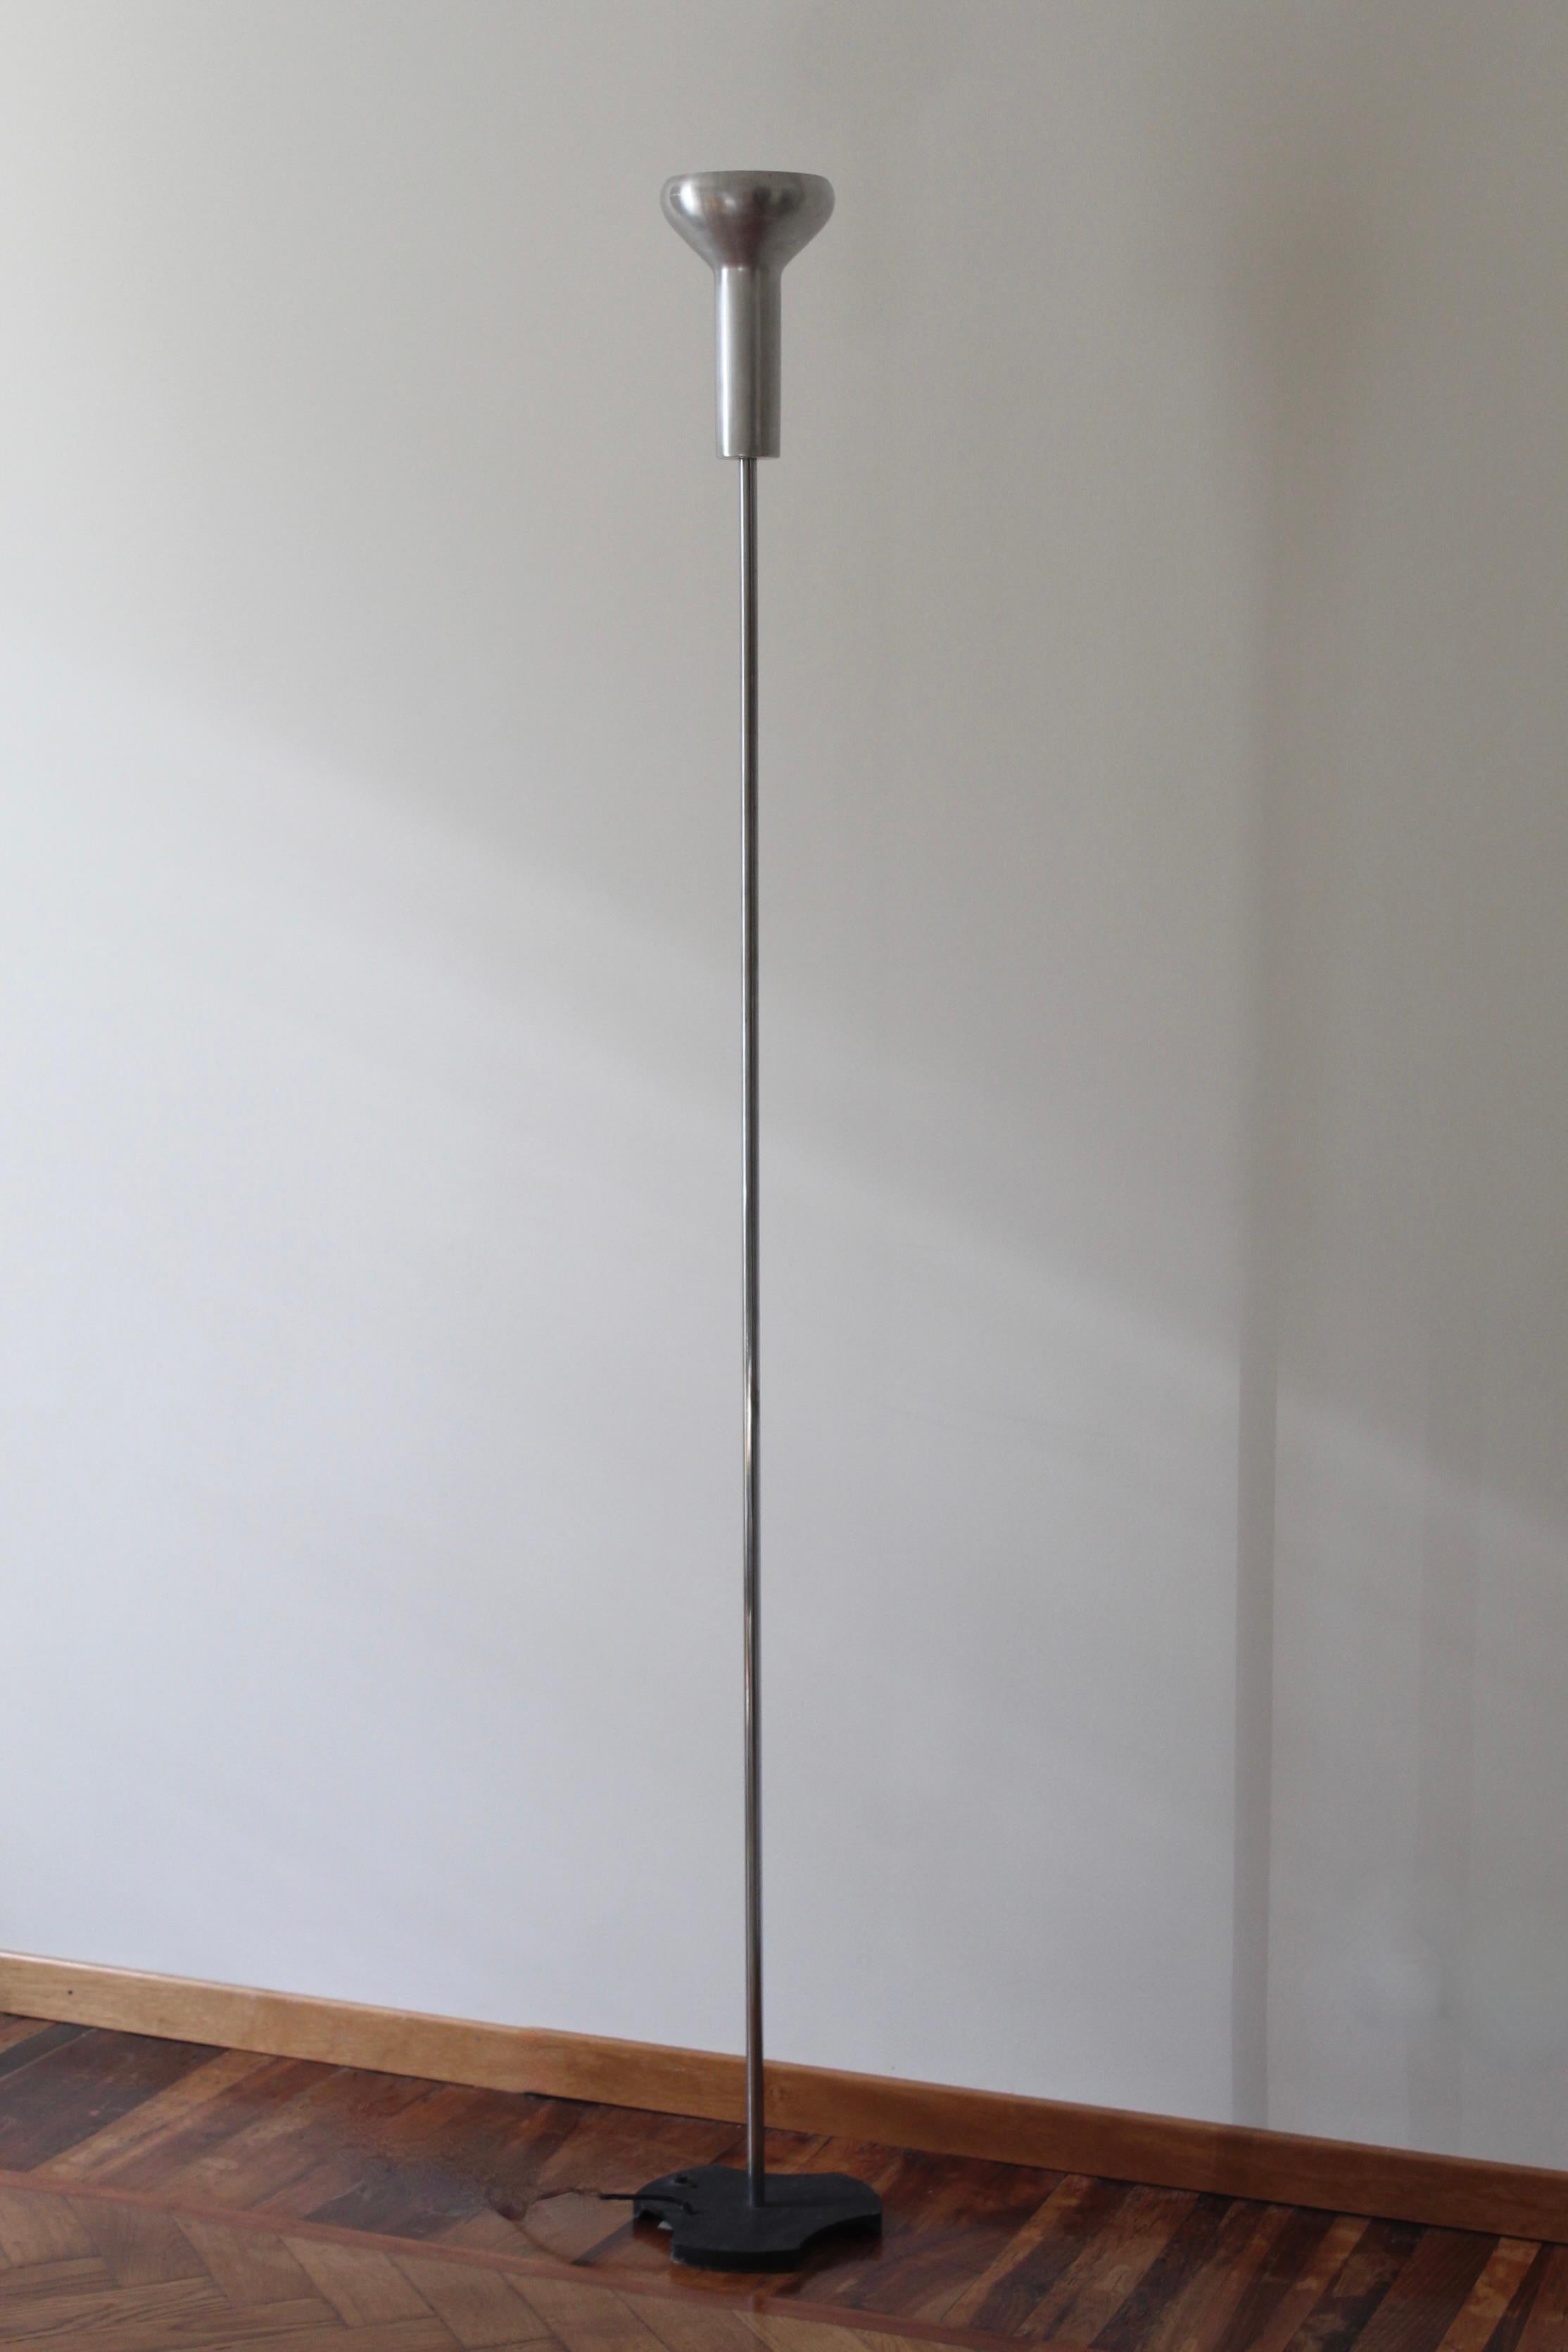 A tall floor lamp / uplight, designed and produced by Gino Sarfatti for Arteluce, Italy, 1950s. In chome plated metal, lacquered metal, and Aluminium.